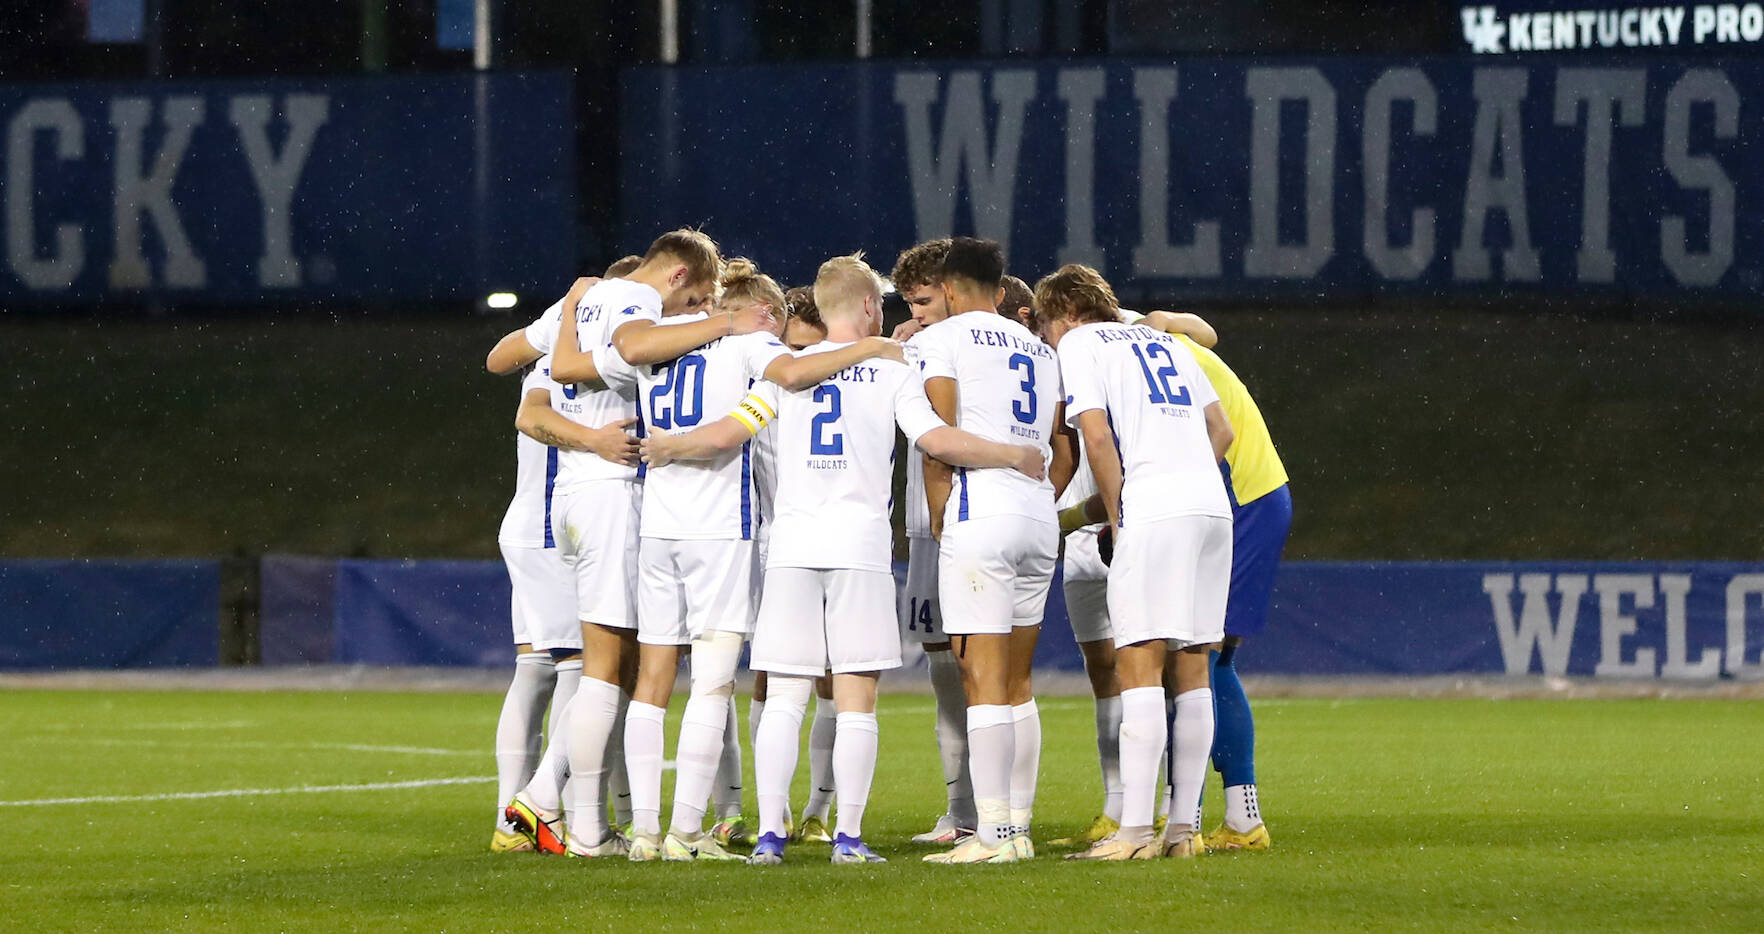 Undefeated Men’s Soccer Travels to West Virginia Saturday